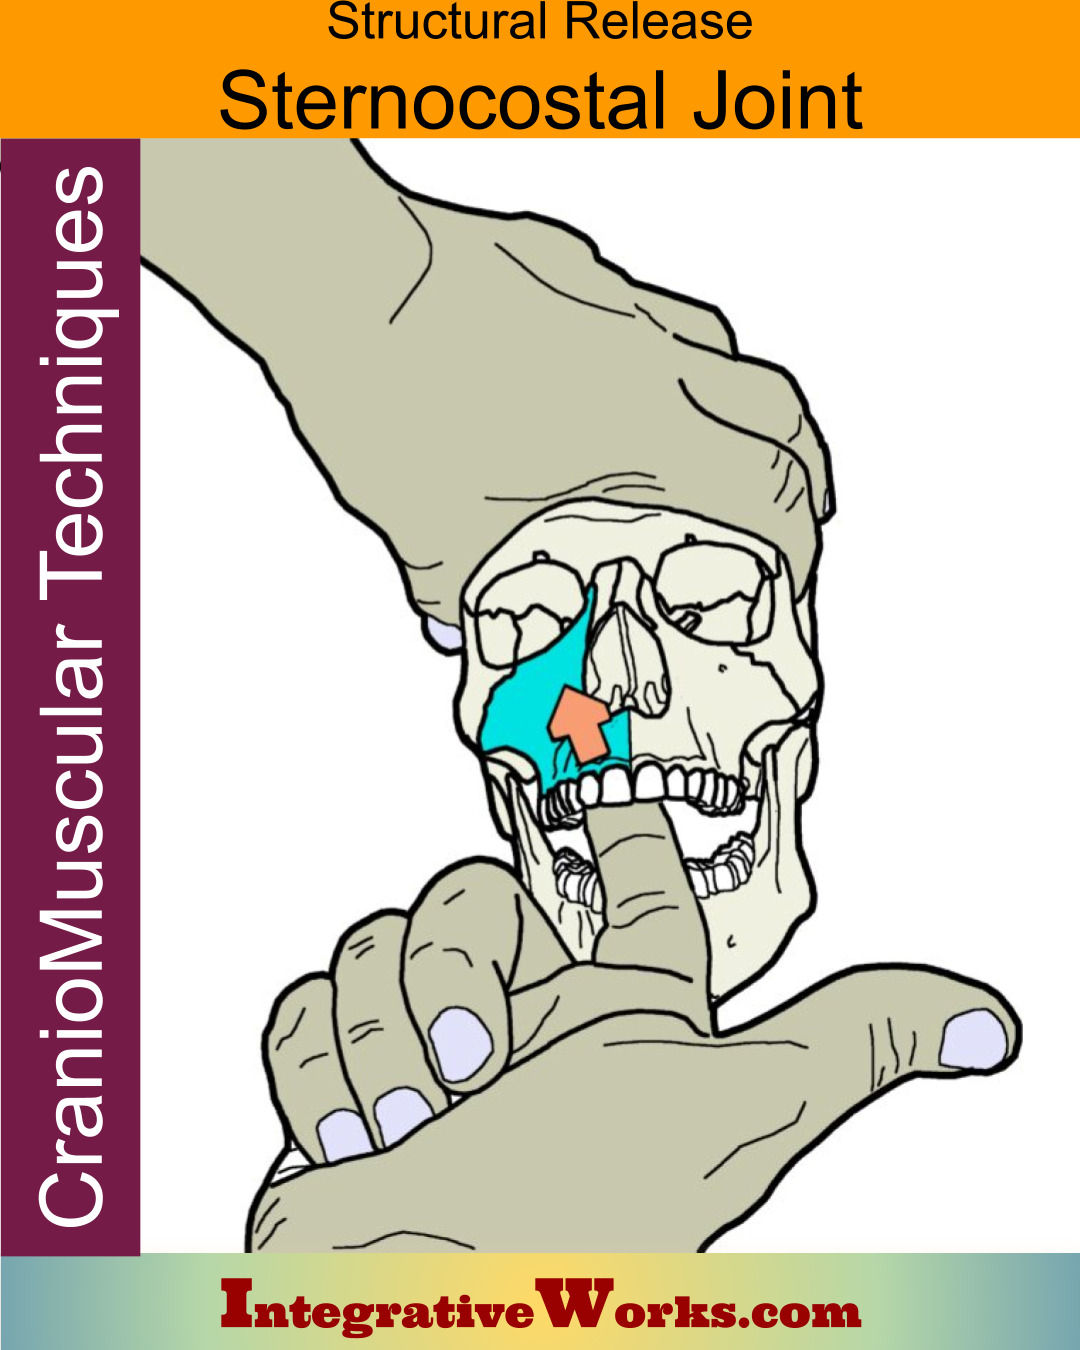 Sternocostal Joint – Structural Release